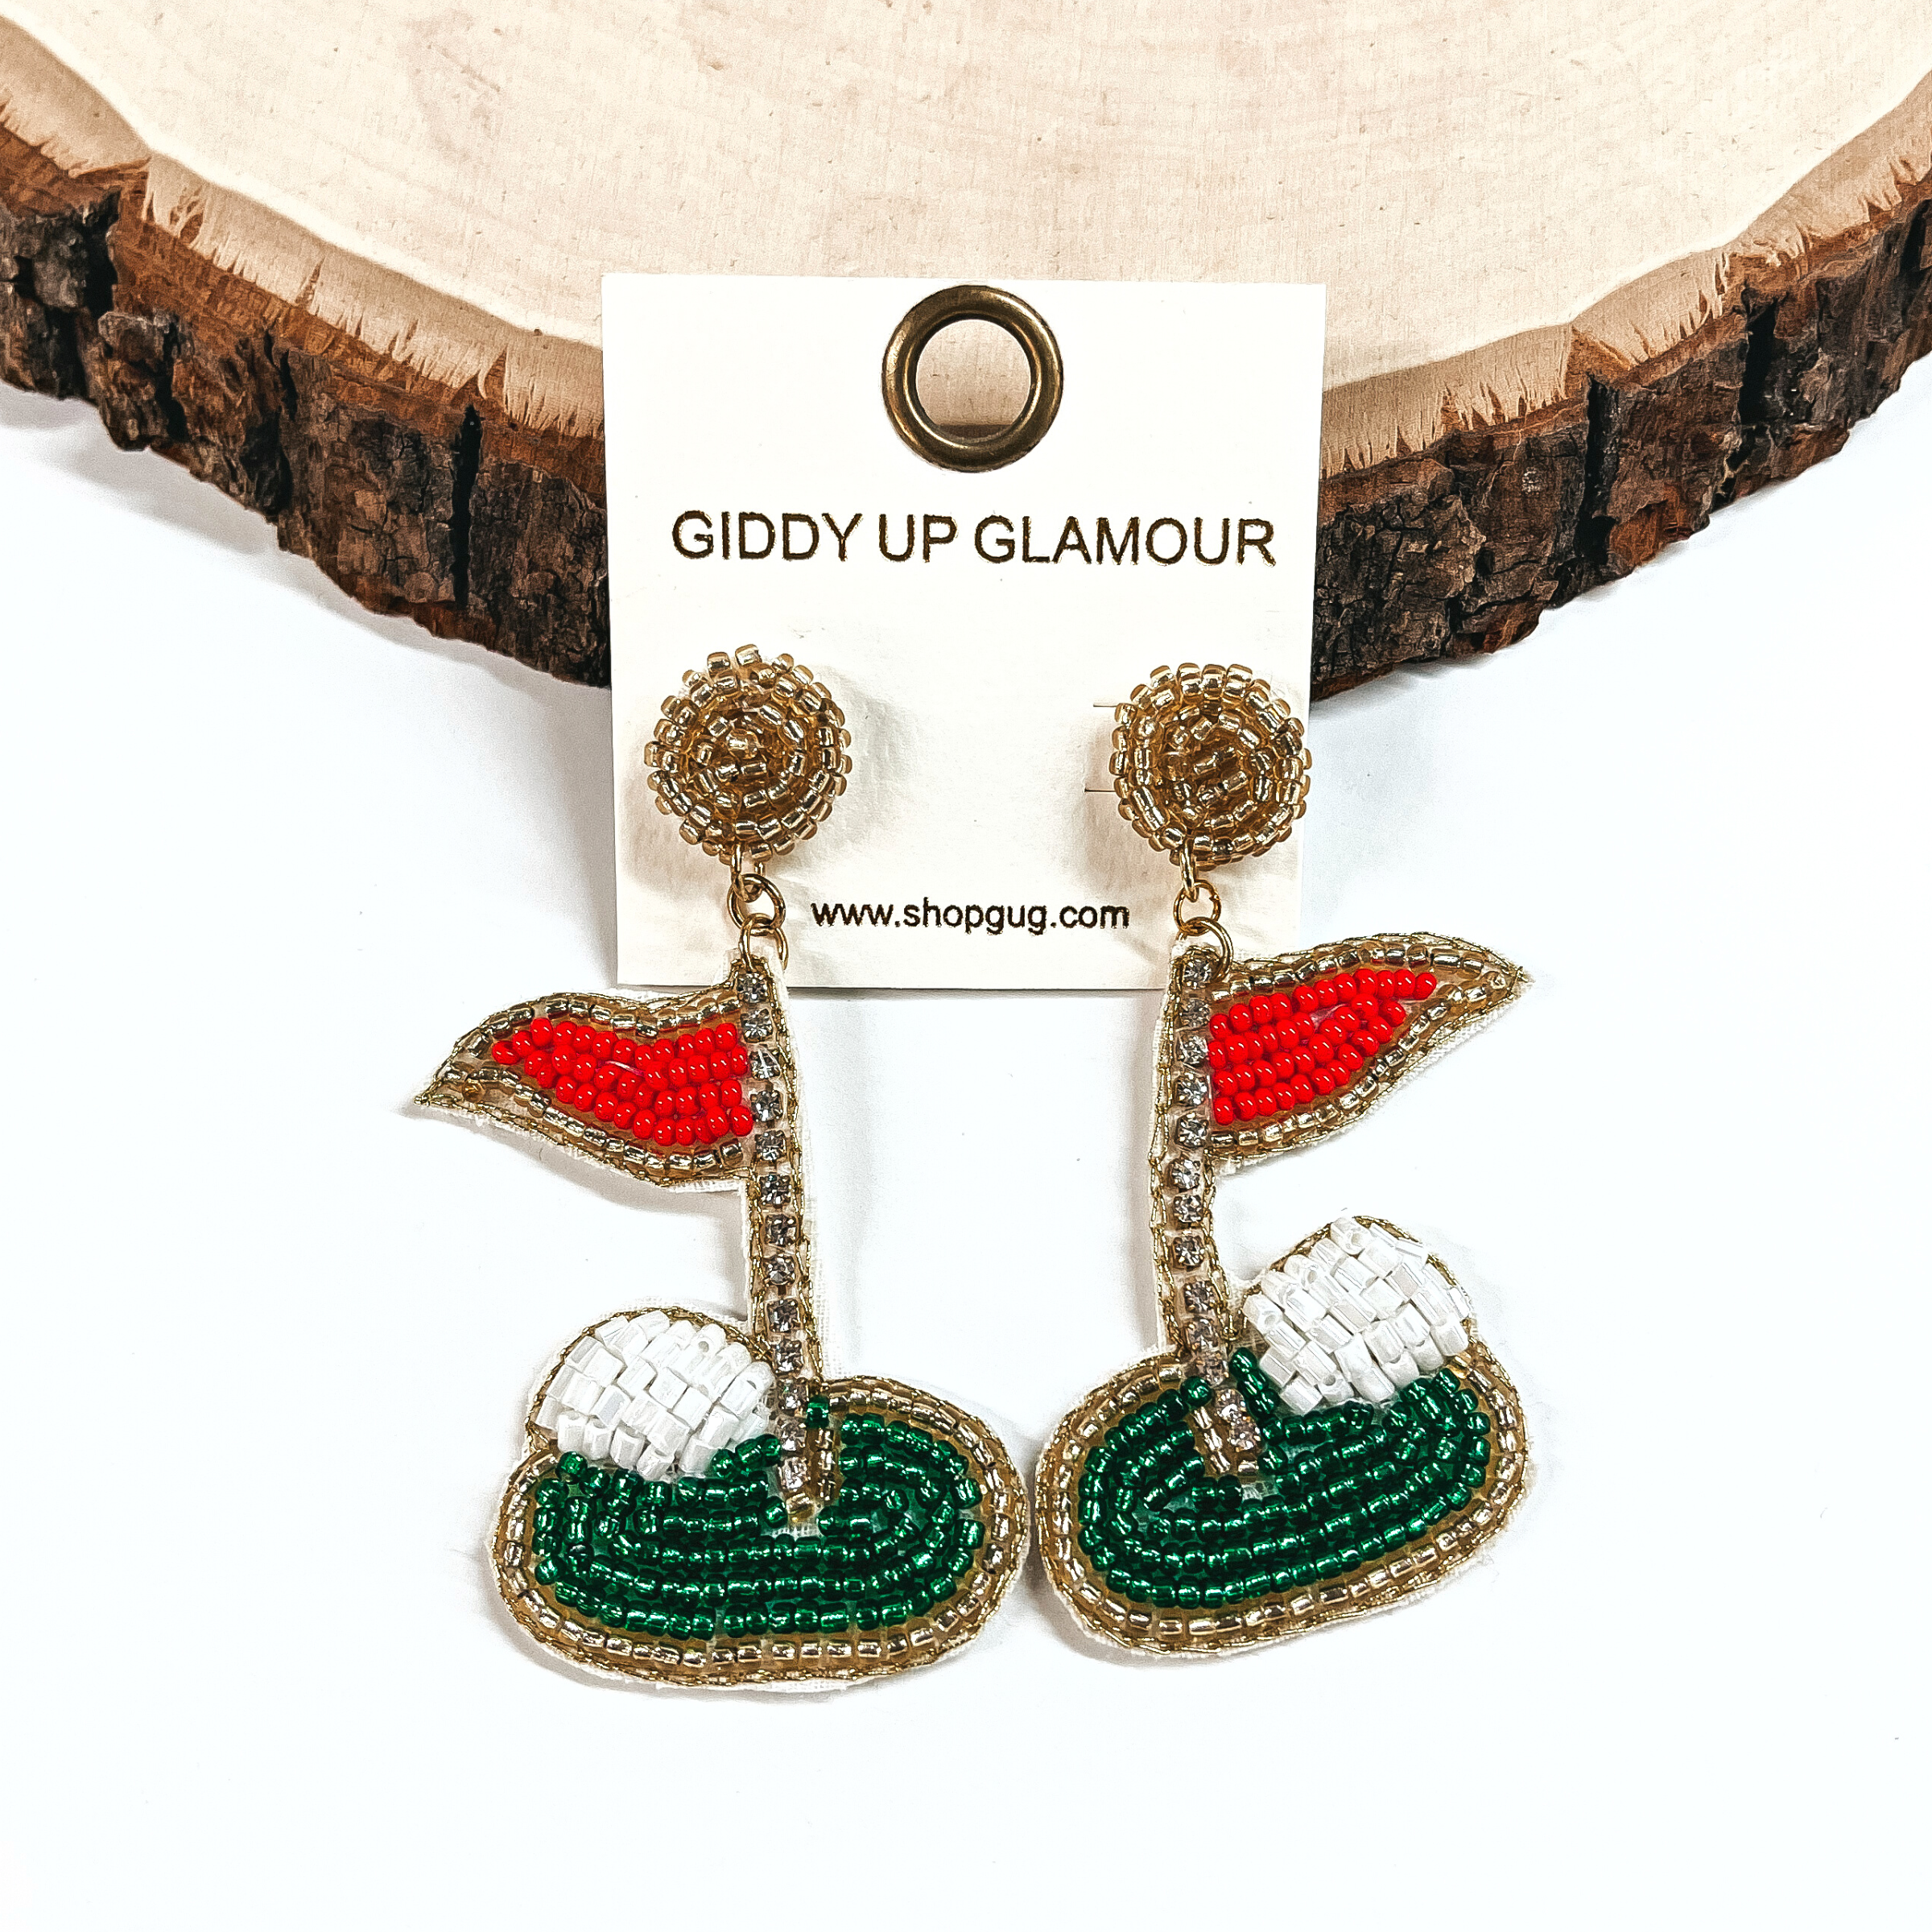 These are beaded golf earrings in mostly gold with a red flag and green grass, white ball. The flag pole has clear rhinestones. These earrings are taken on a white background and leaning against a a slab of wood.